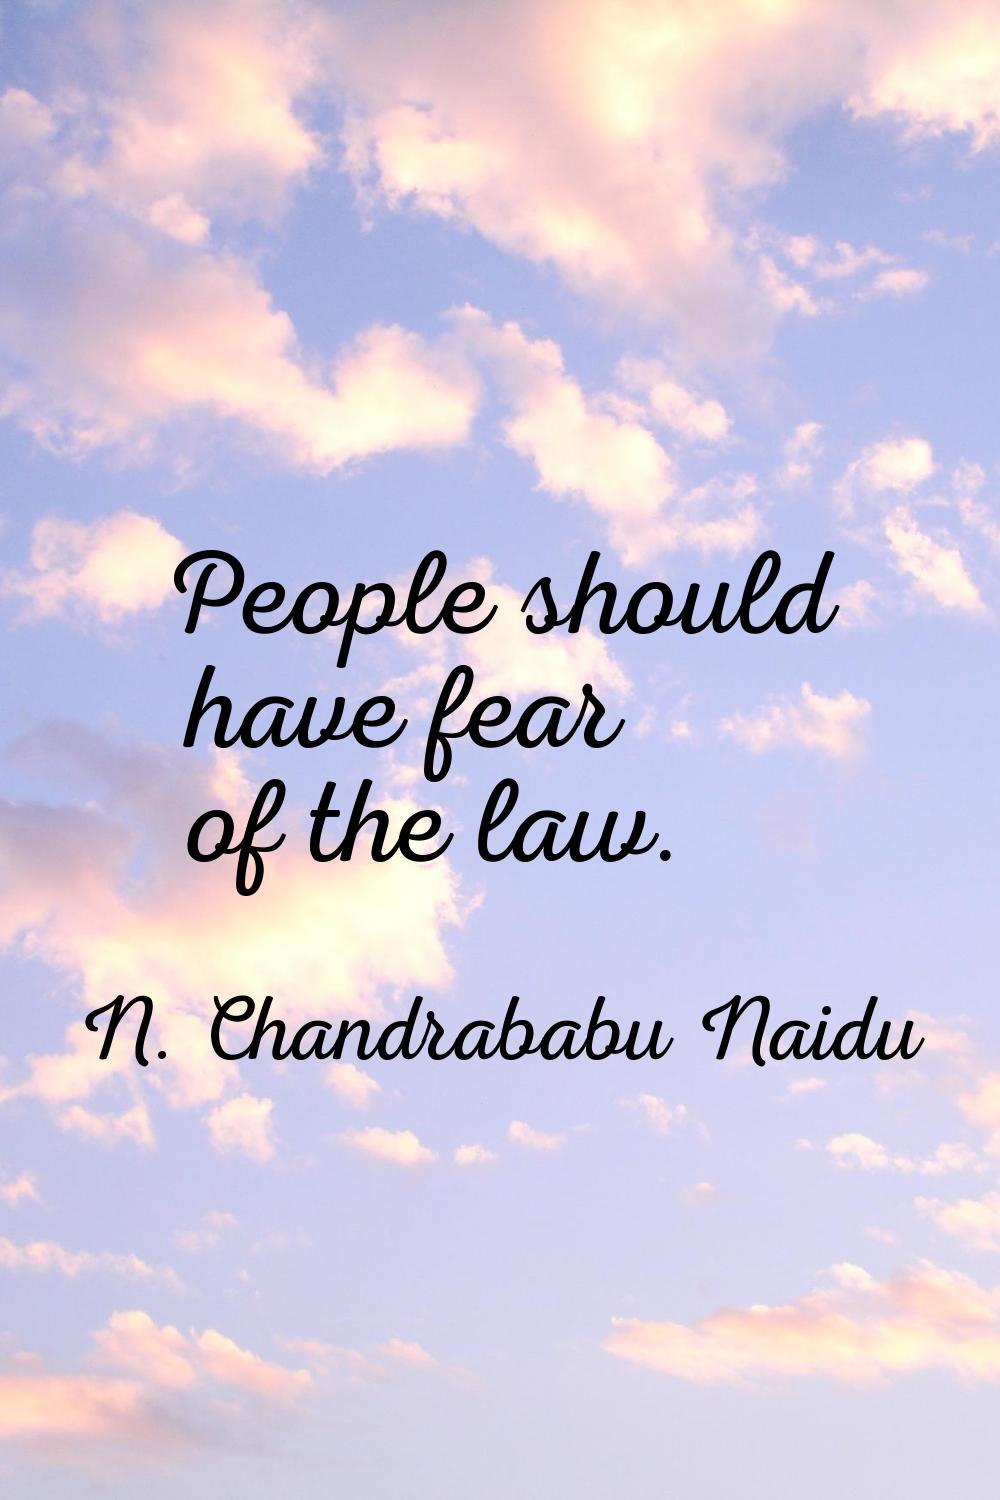 People should have fear of the law.